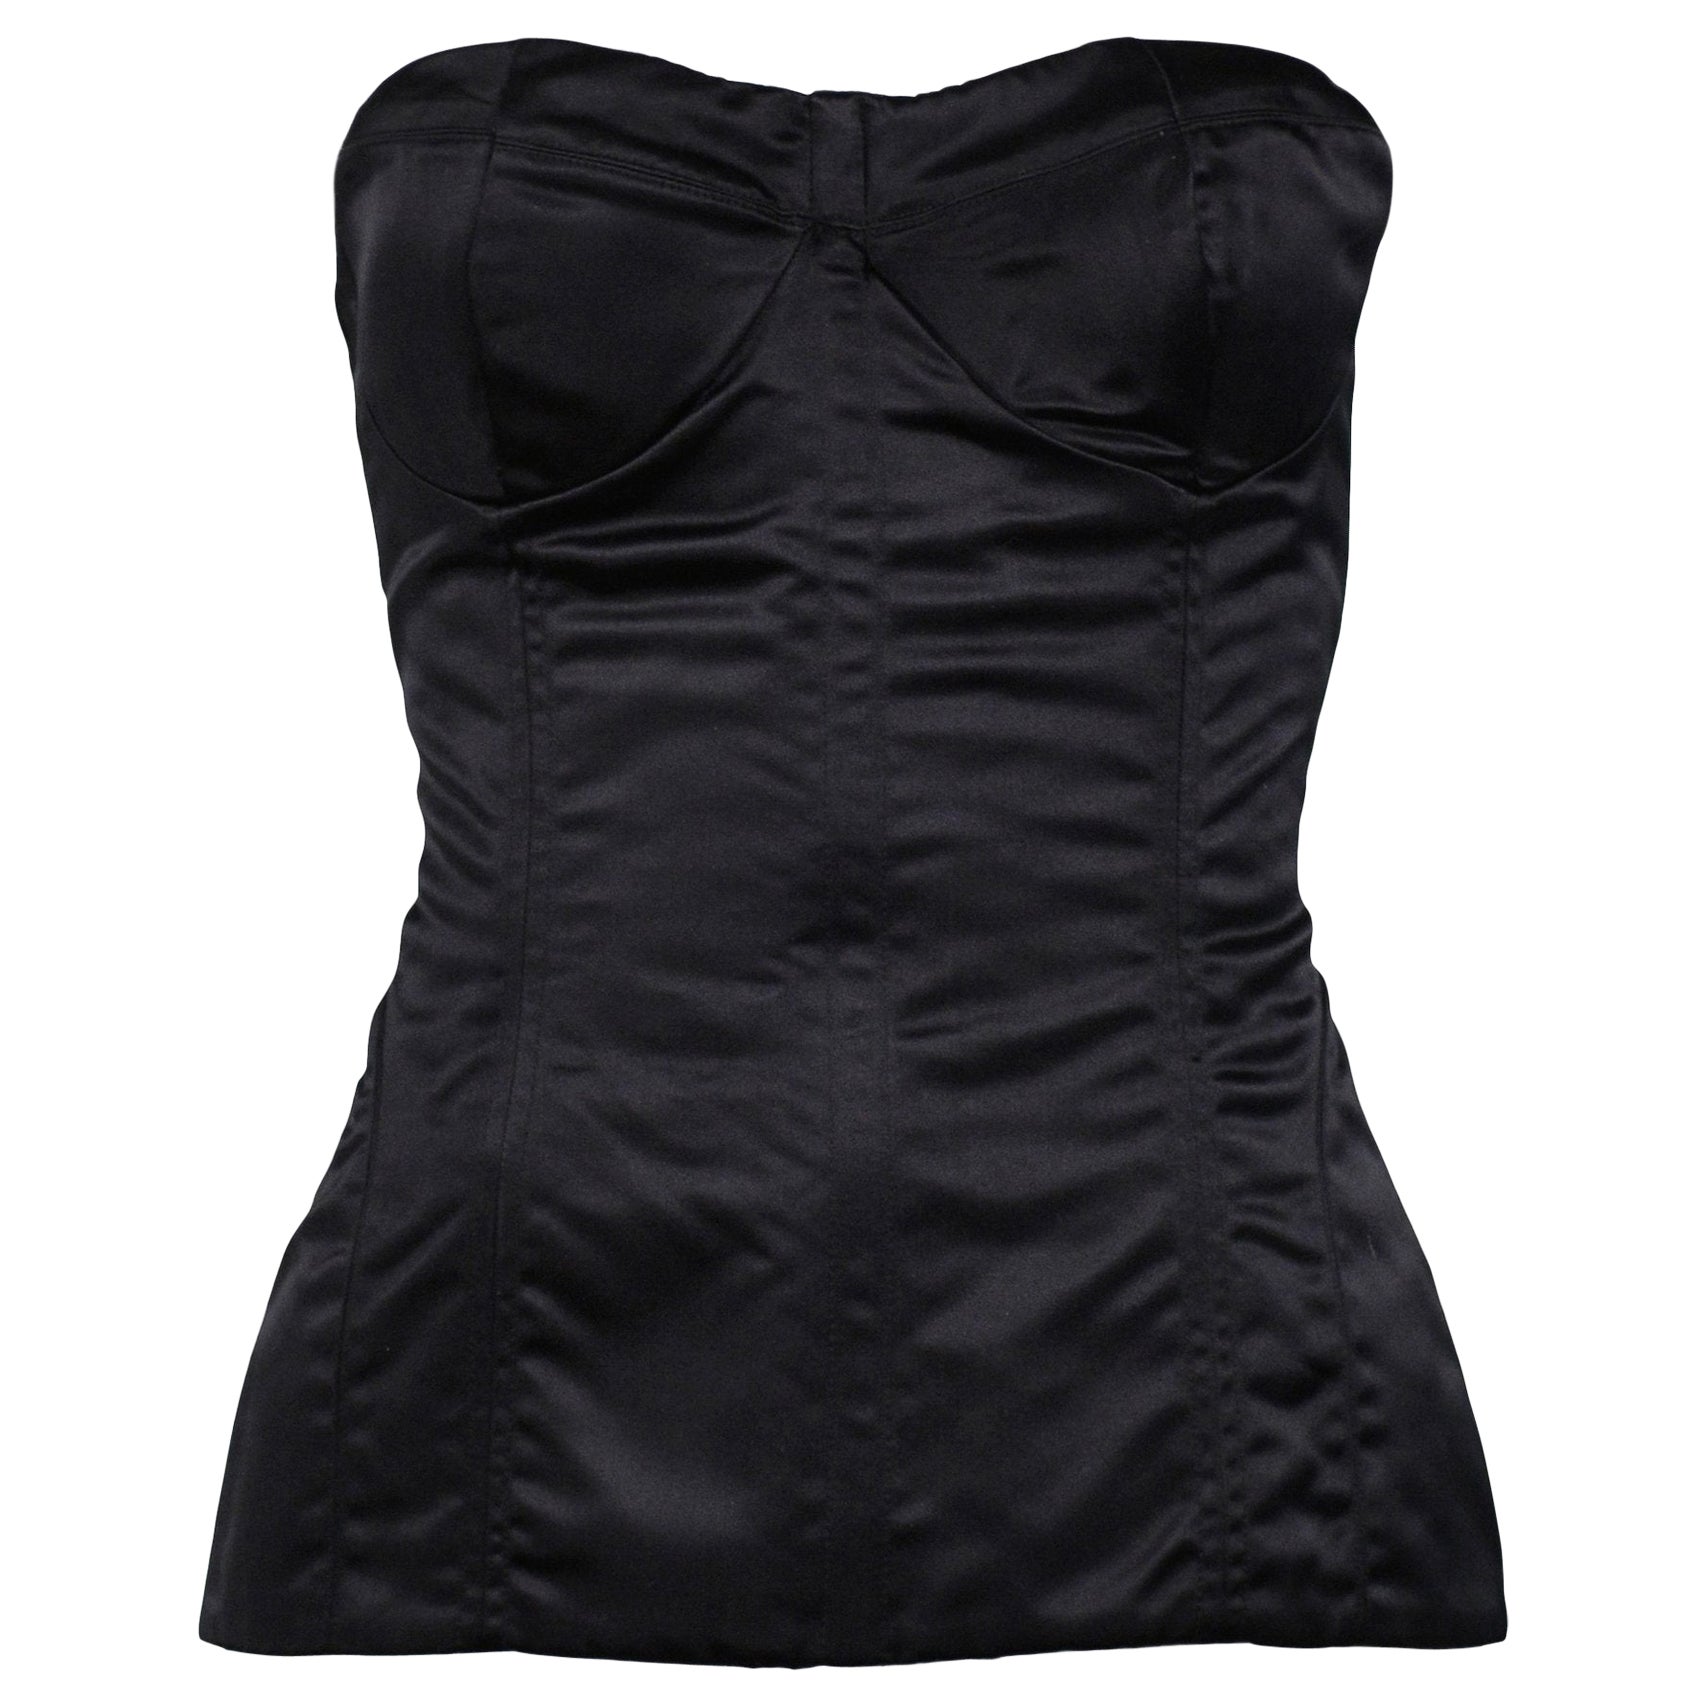 Gucci By Tom Ford Black Satin Corset Bustier Top 2001